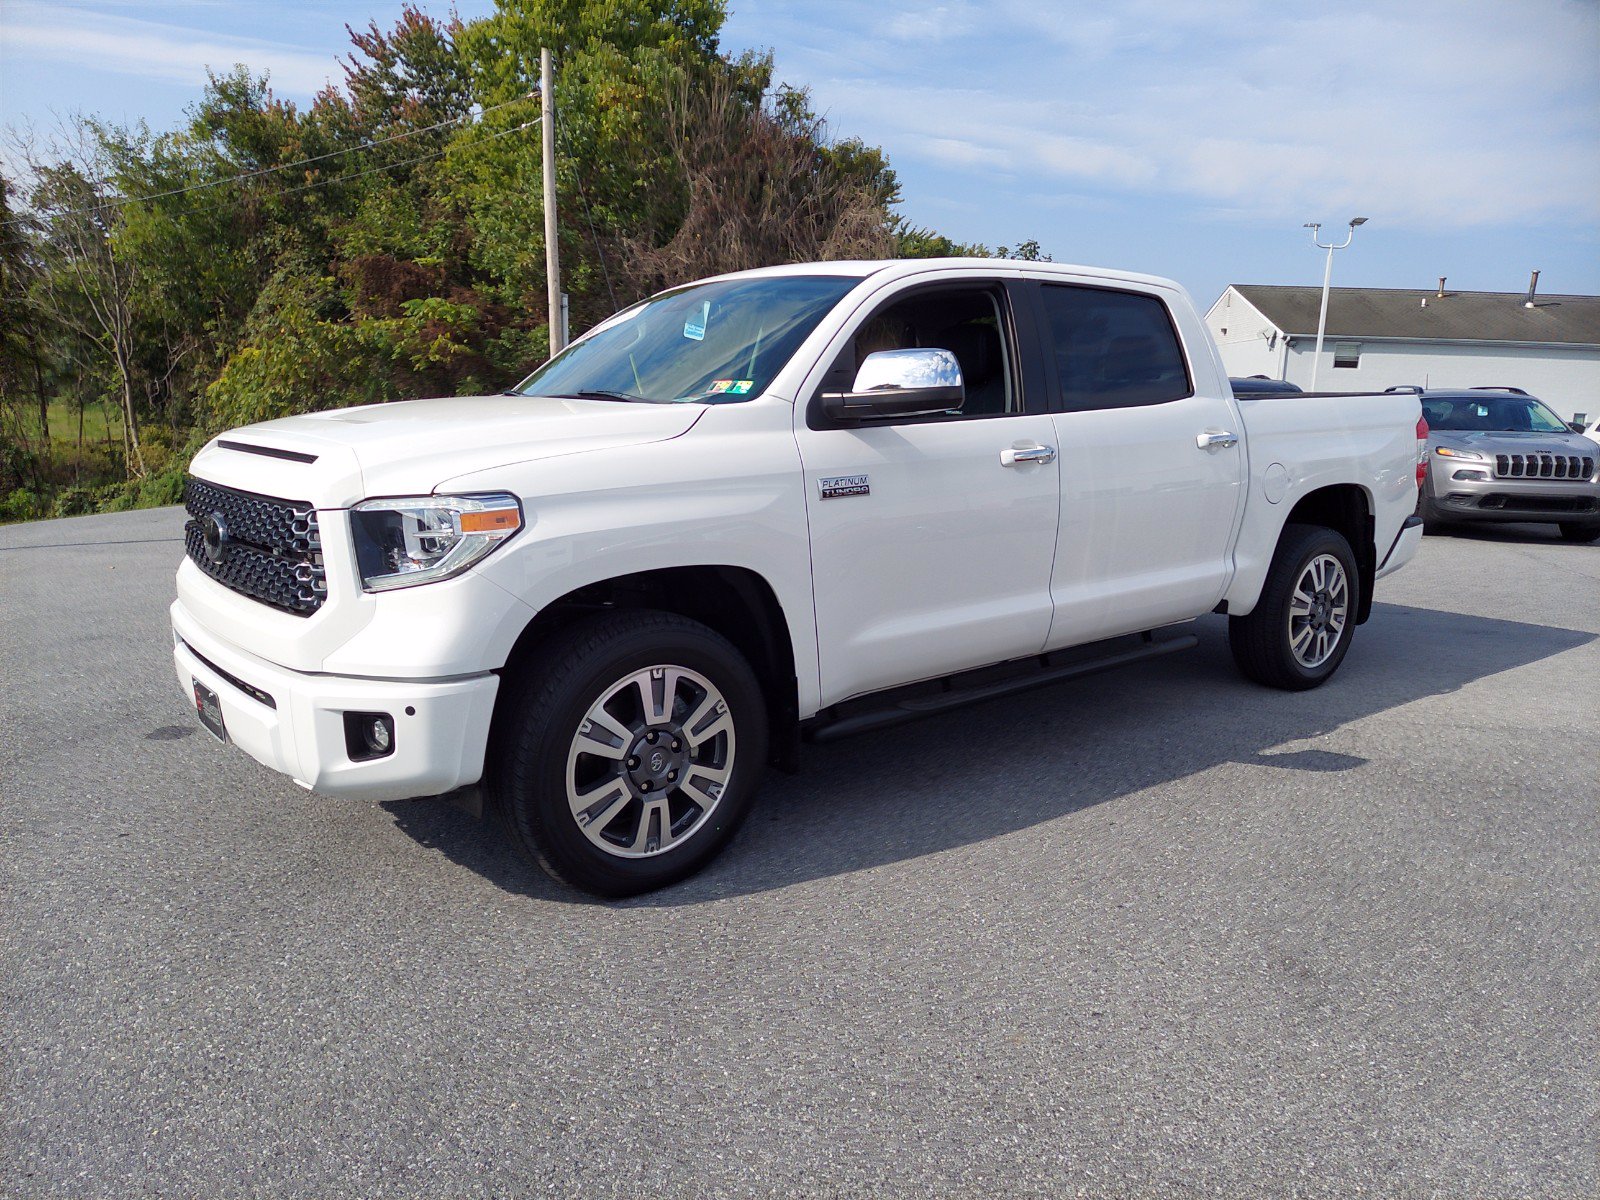 Certified Pre-Owned 2020 Toyota Tundra 4WD Platinum Crew Cab Pickup in